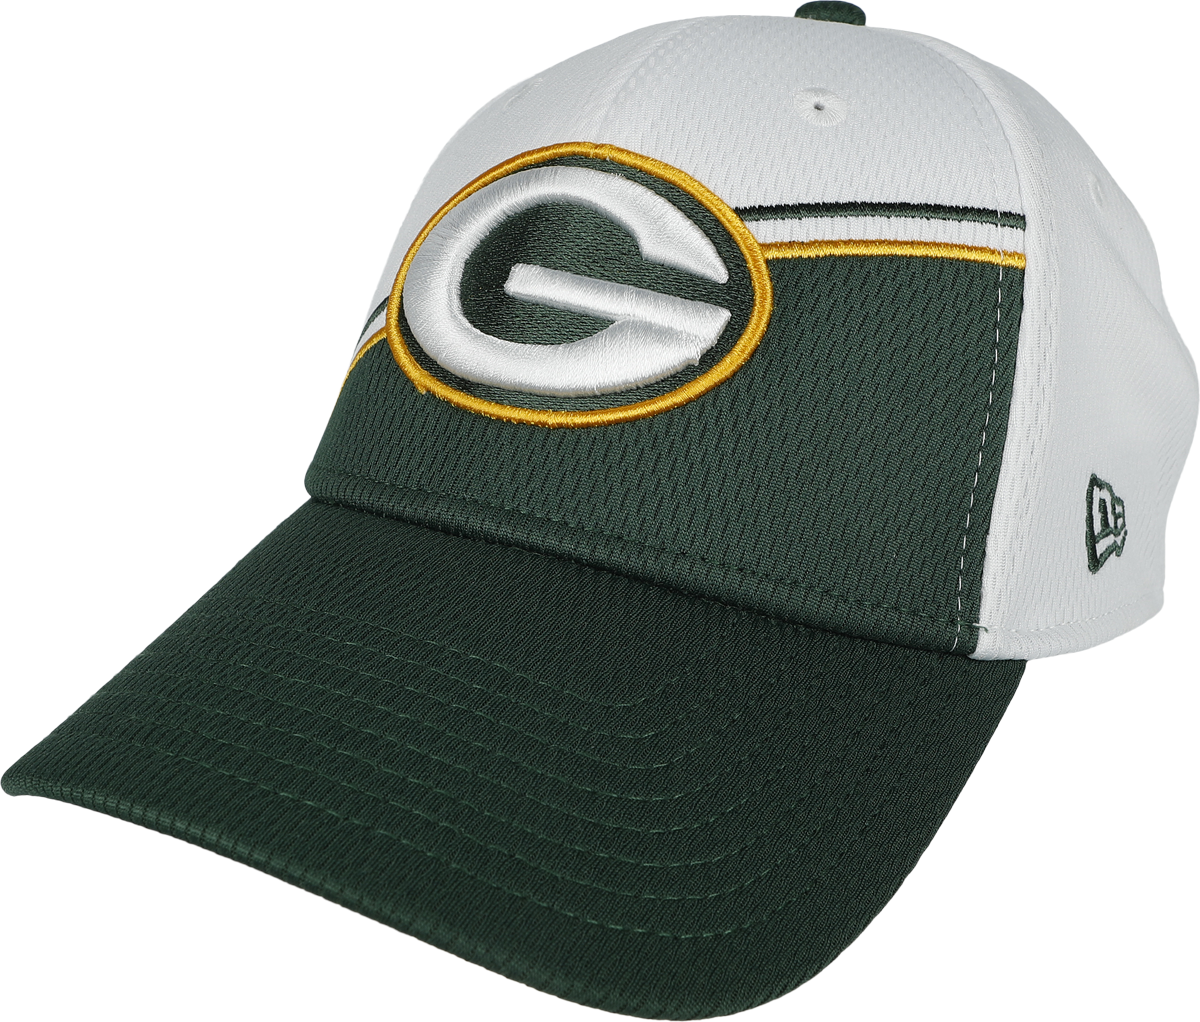 New Era - NFL - 9FORTY Green Bay Packers Sideline - Cap - multicolor